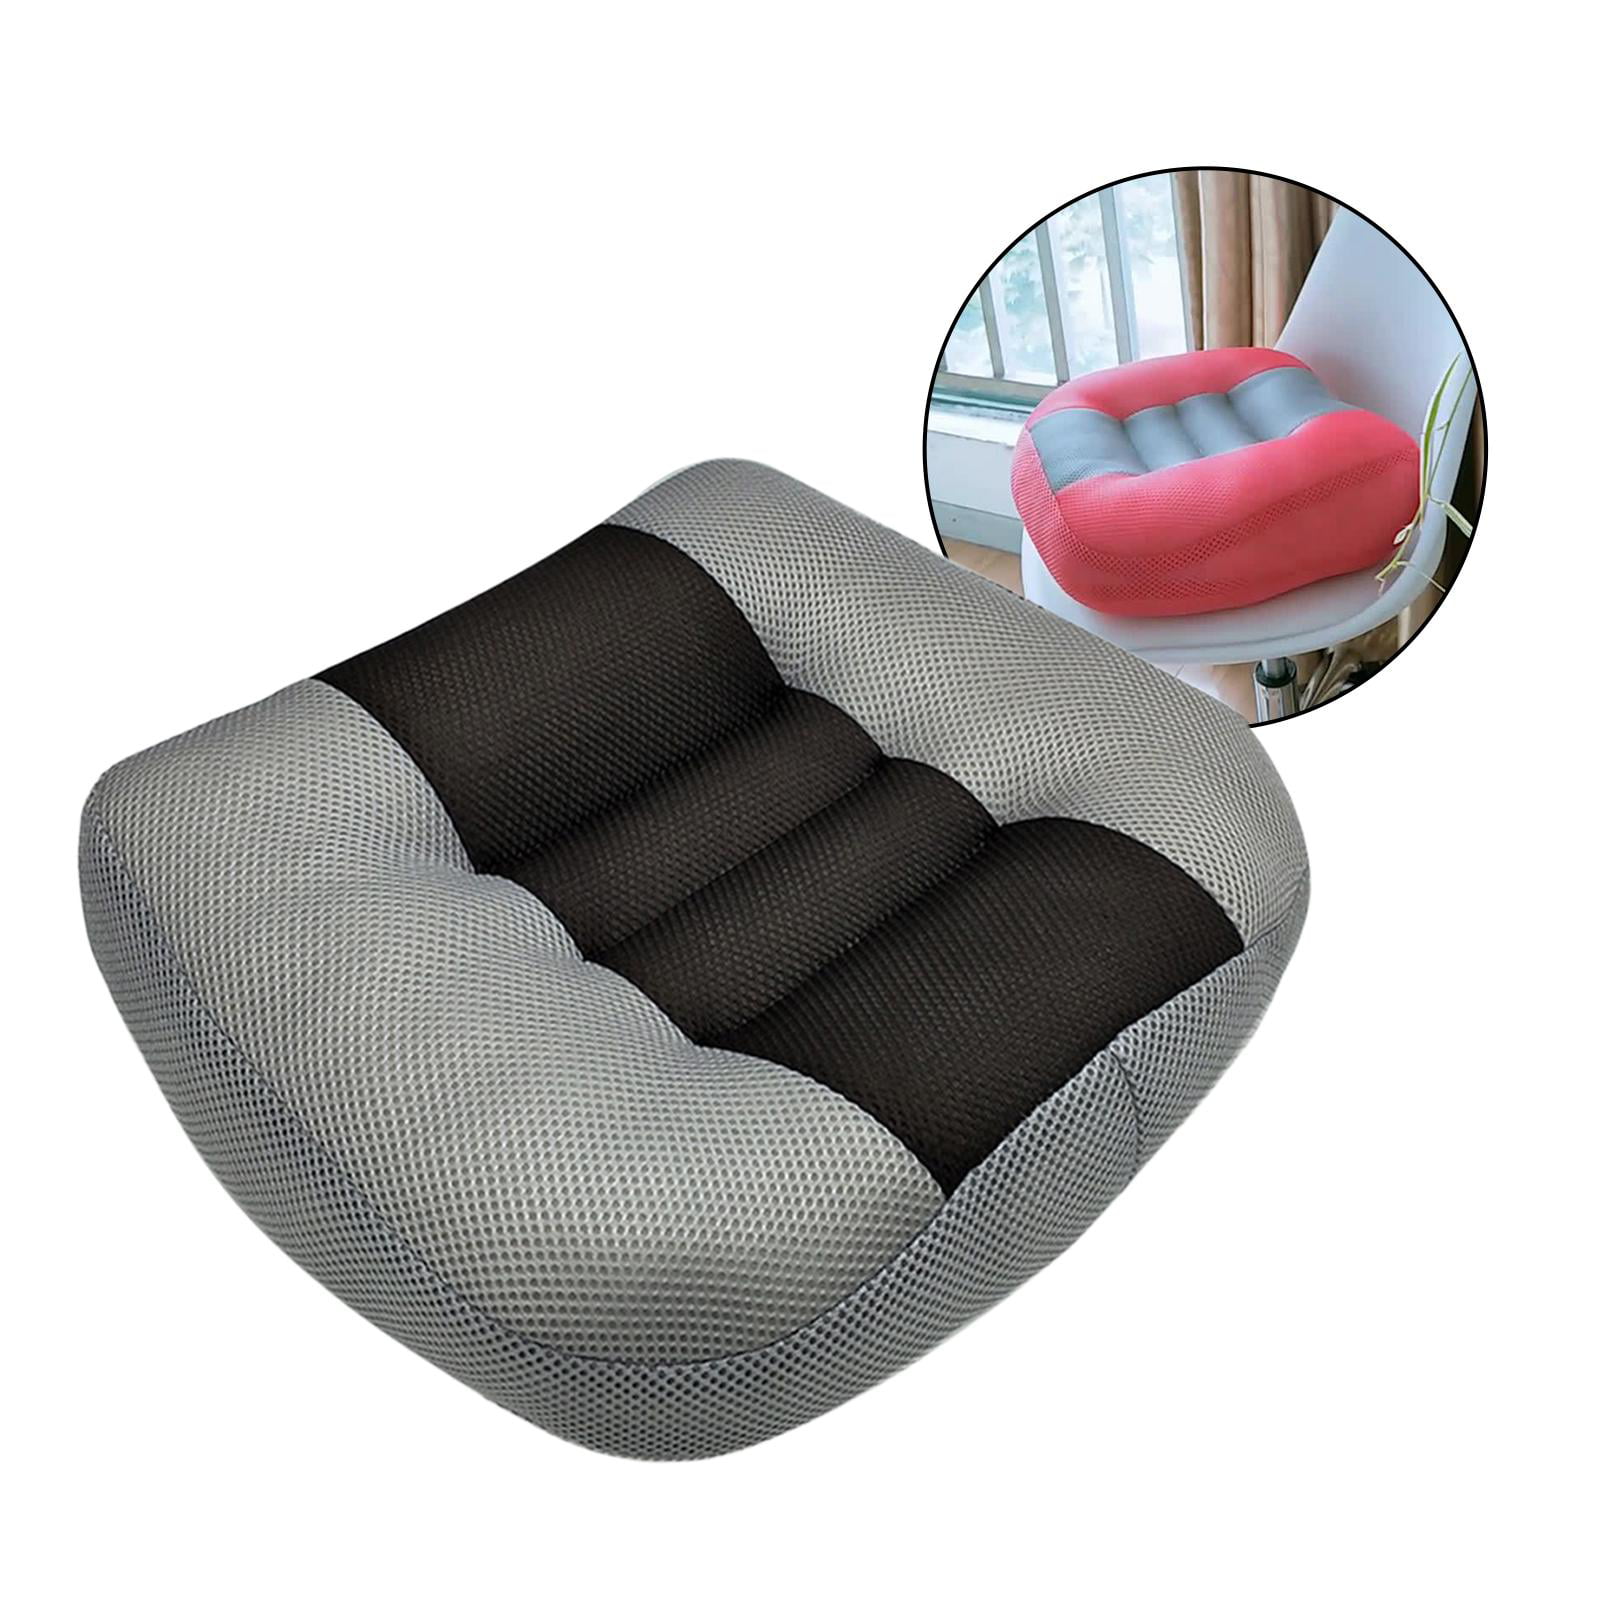  Wellnoon Adult Booster Seat for Car, Car Seat Booster Broaden  Driving Vision, Ergonomic Car Seat Cushion Relieve Back Fatigue